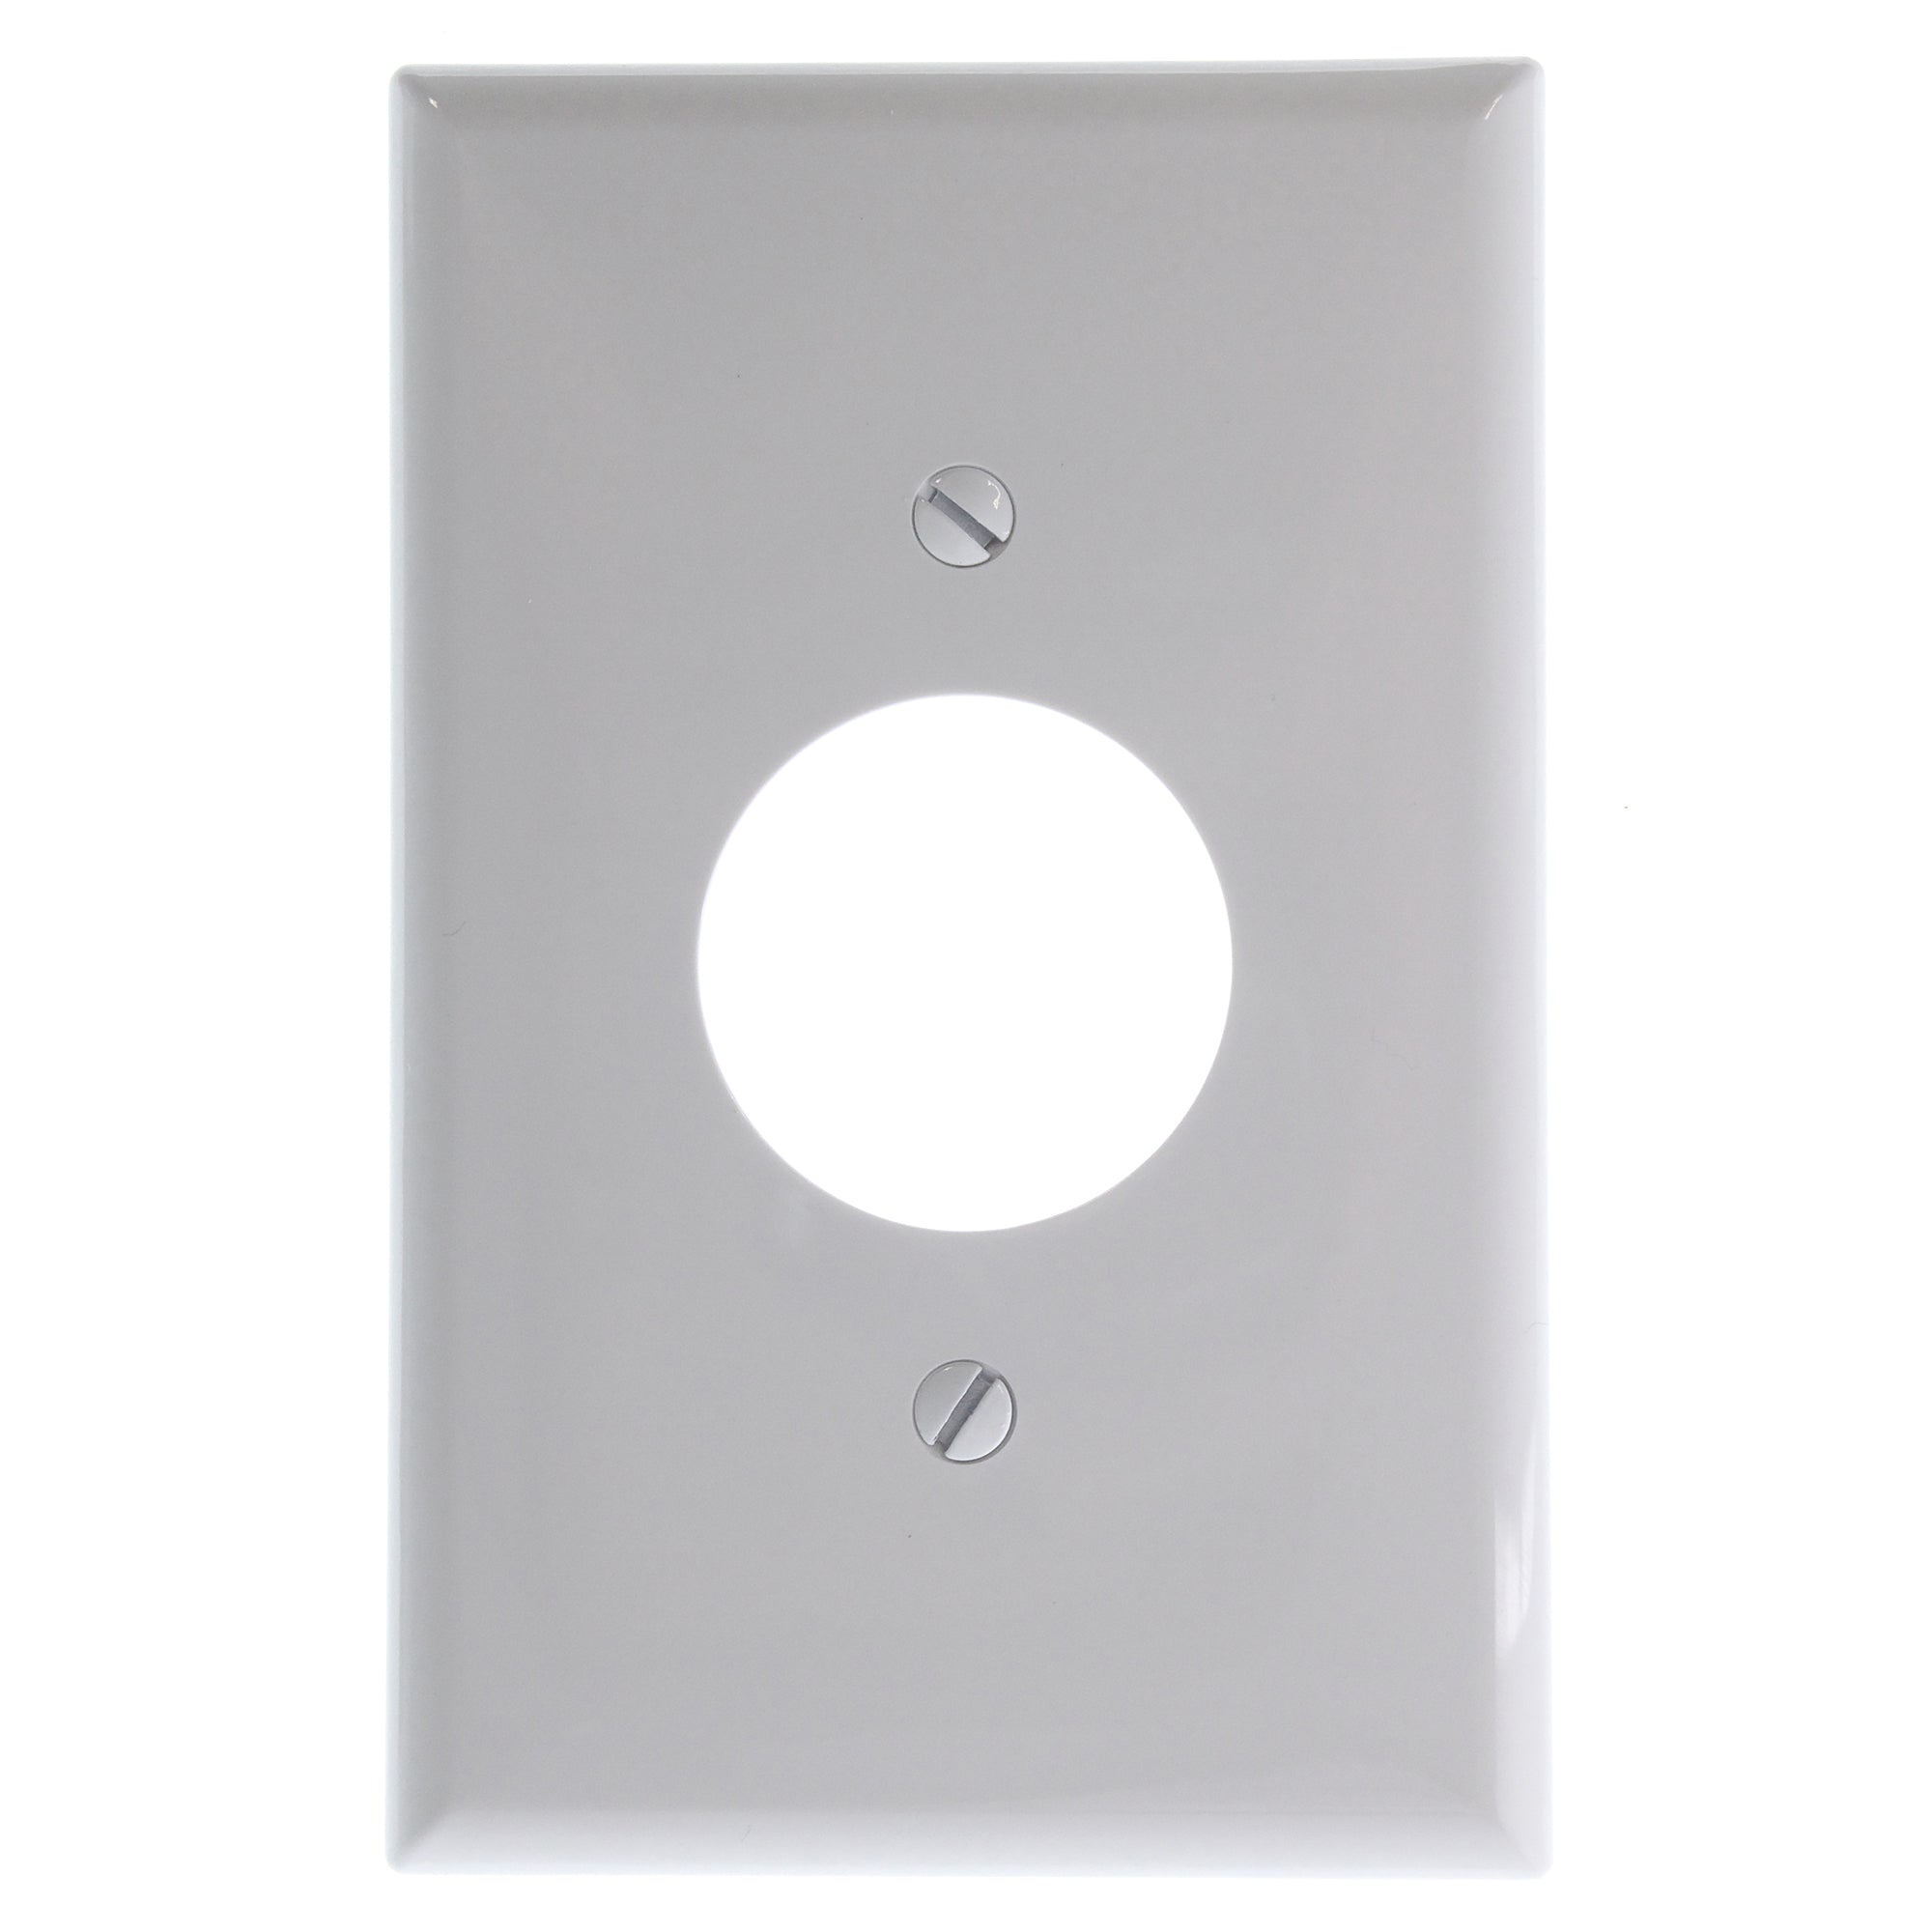 Cooper, COOPER PJ7W MID-SIZE POLYCARBONATE 1-GANG OUTLET WALL PLATE WHITE (25 PACK)